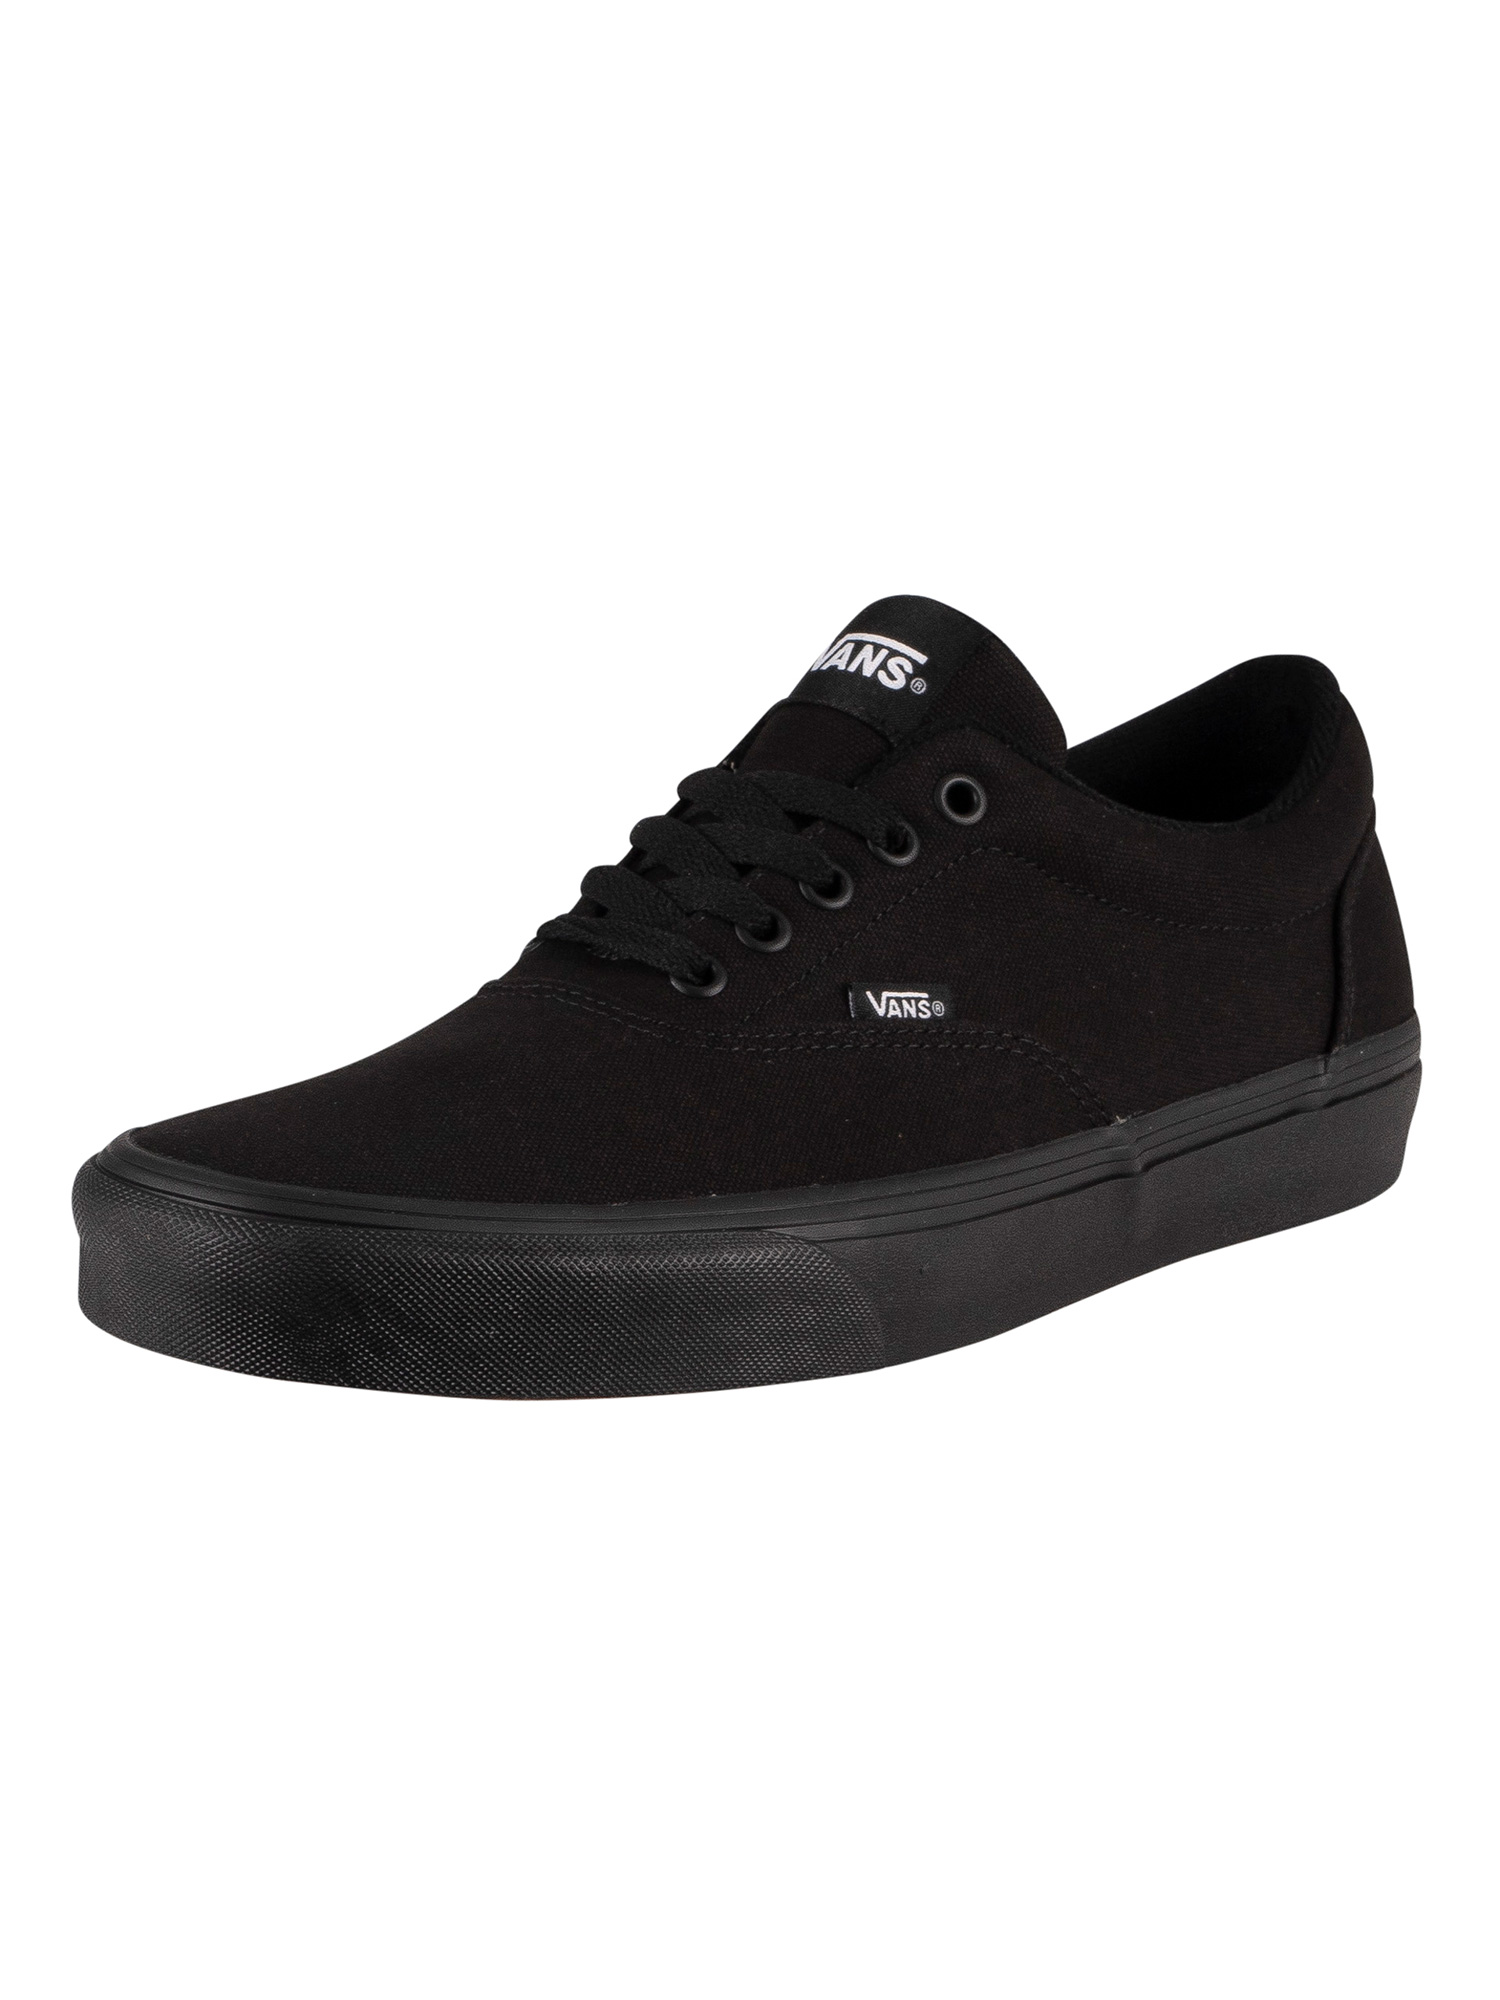 Doheny Canvas Trainers, Black 